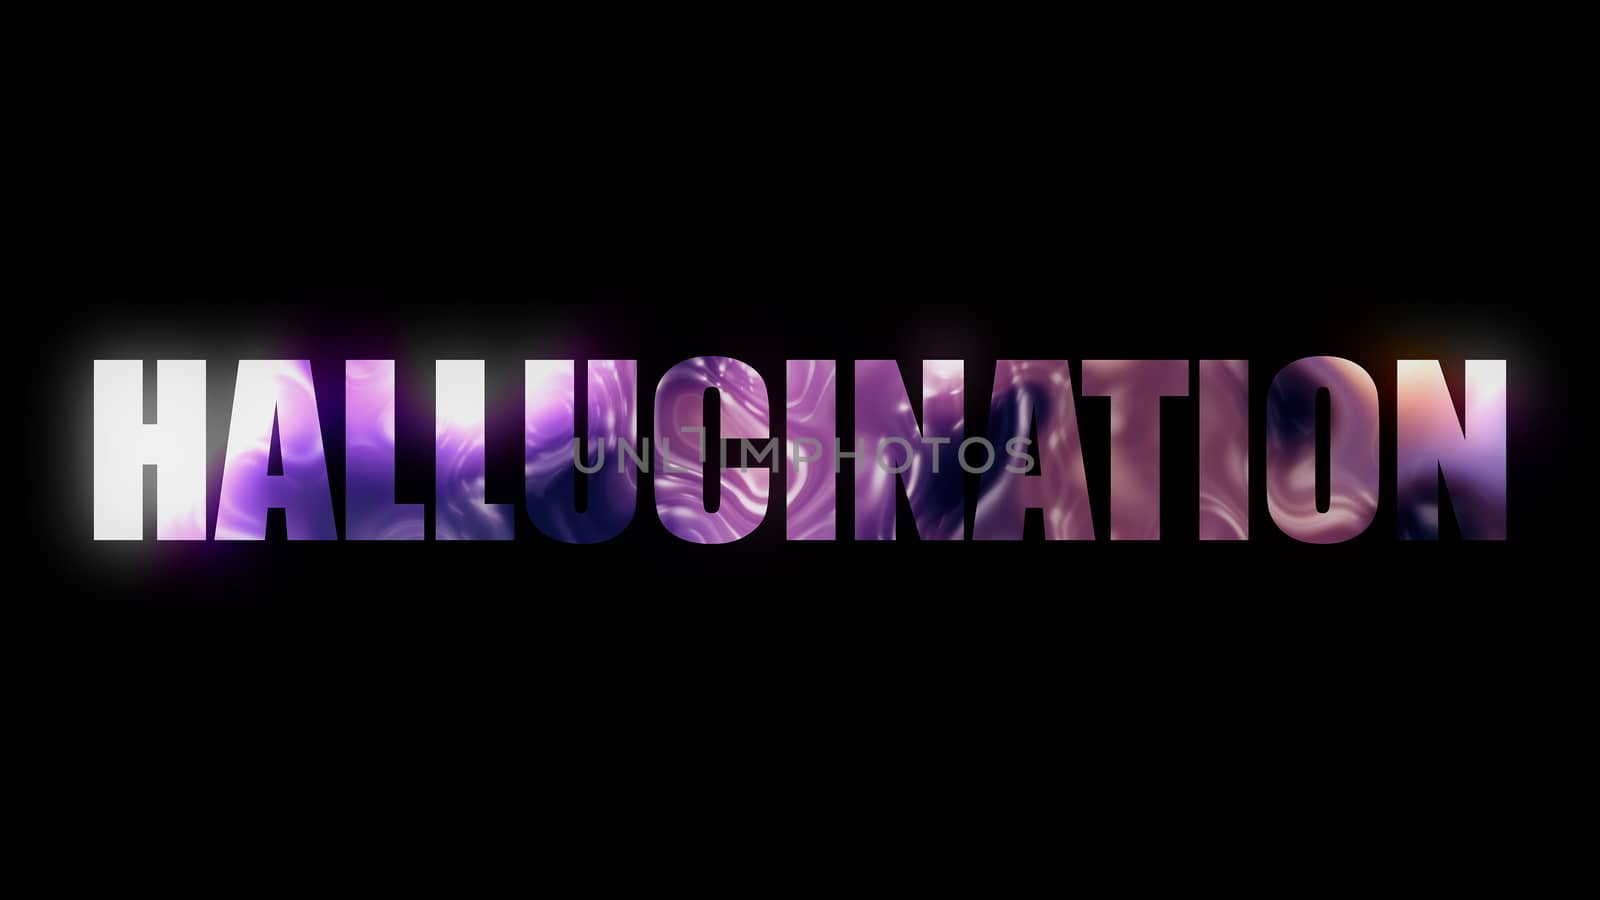 Word Hallucination of letters with a effect of plasma, 3d rendering background, computer generated